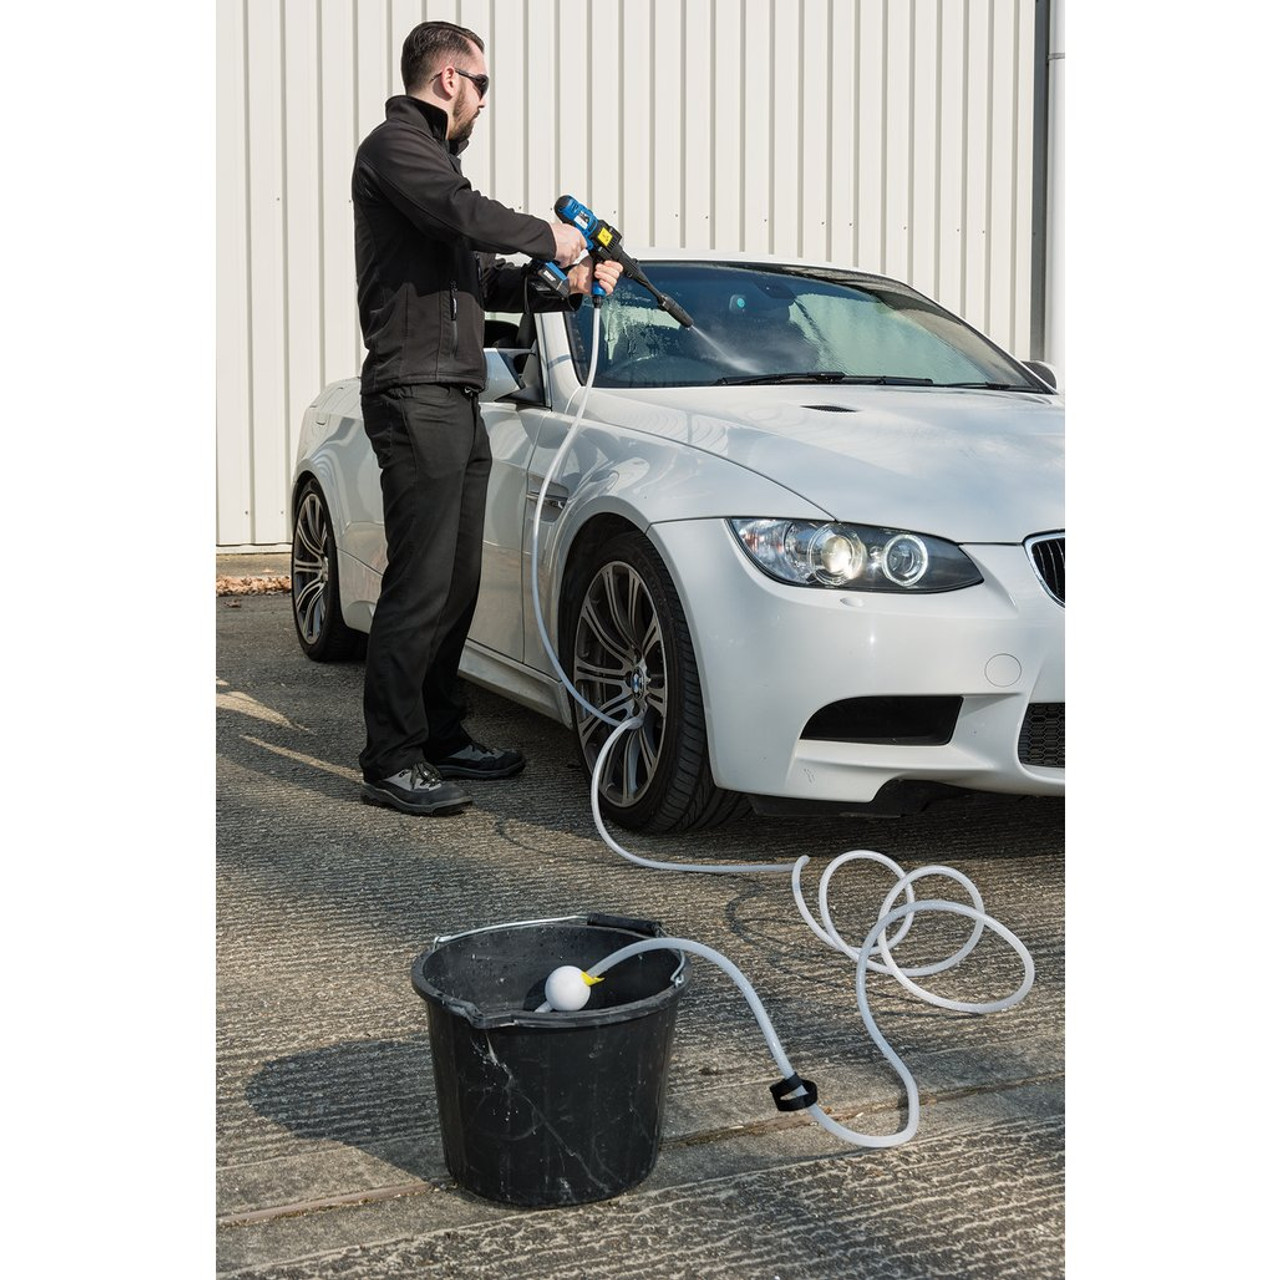 Draper portable pressure washer, Fully remote, no need for mains water supply operate from a bucket or similar.